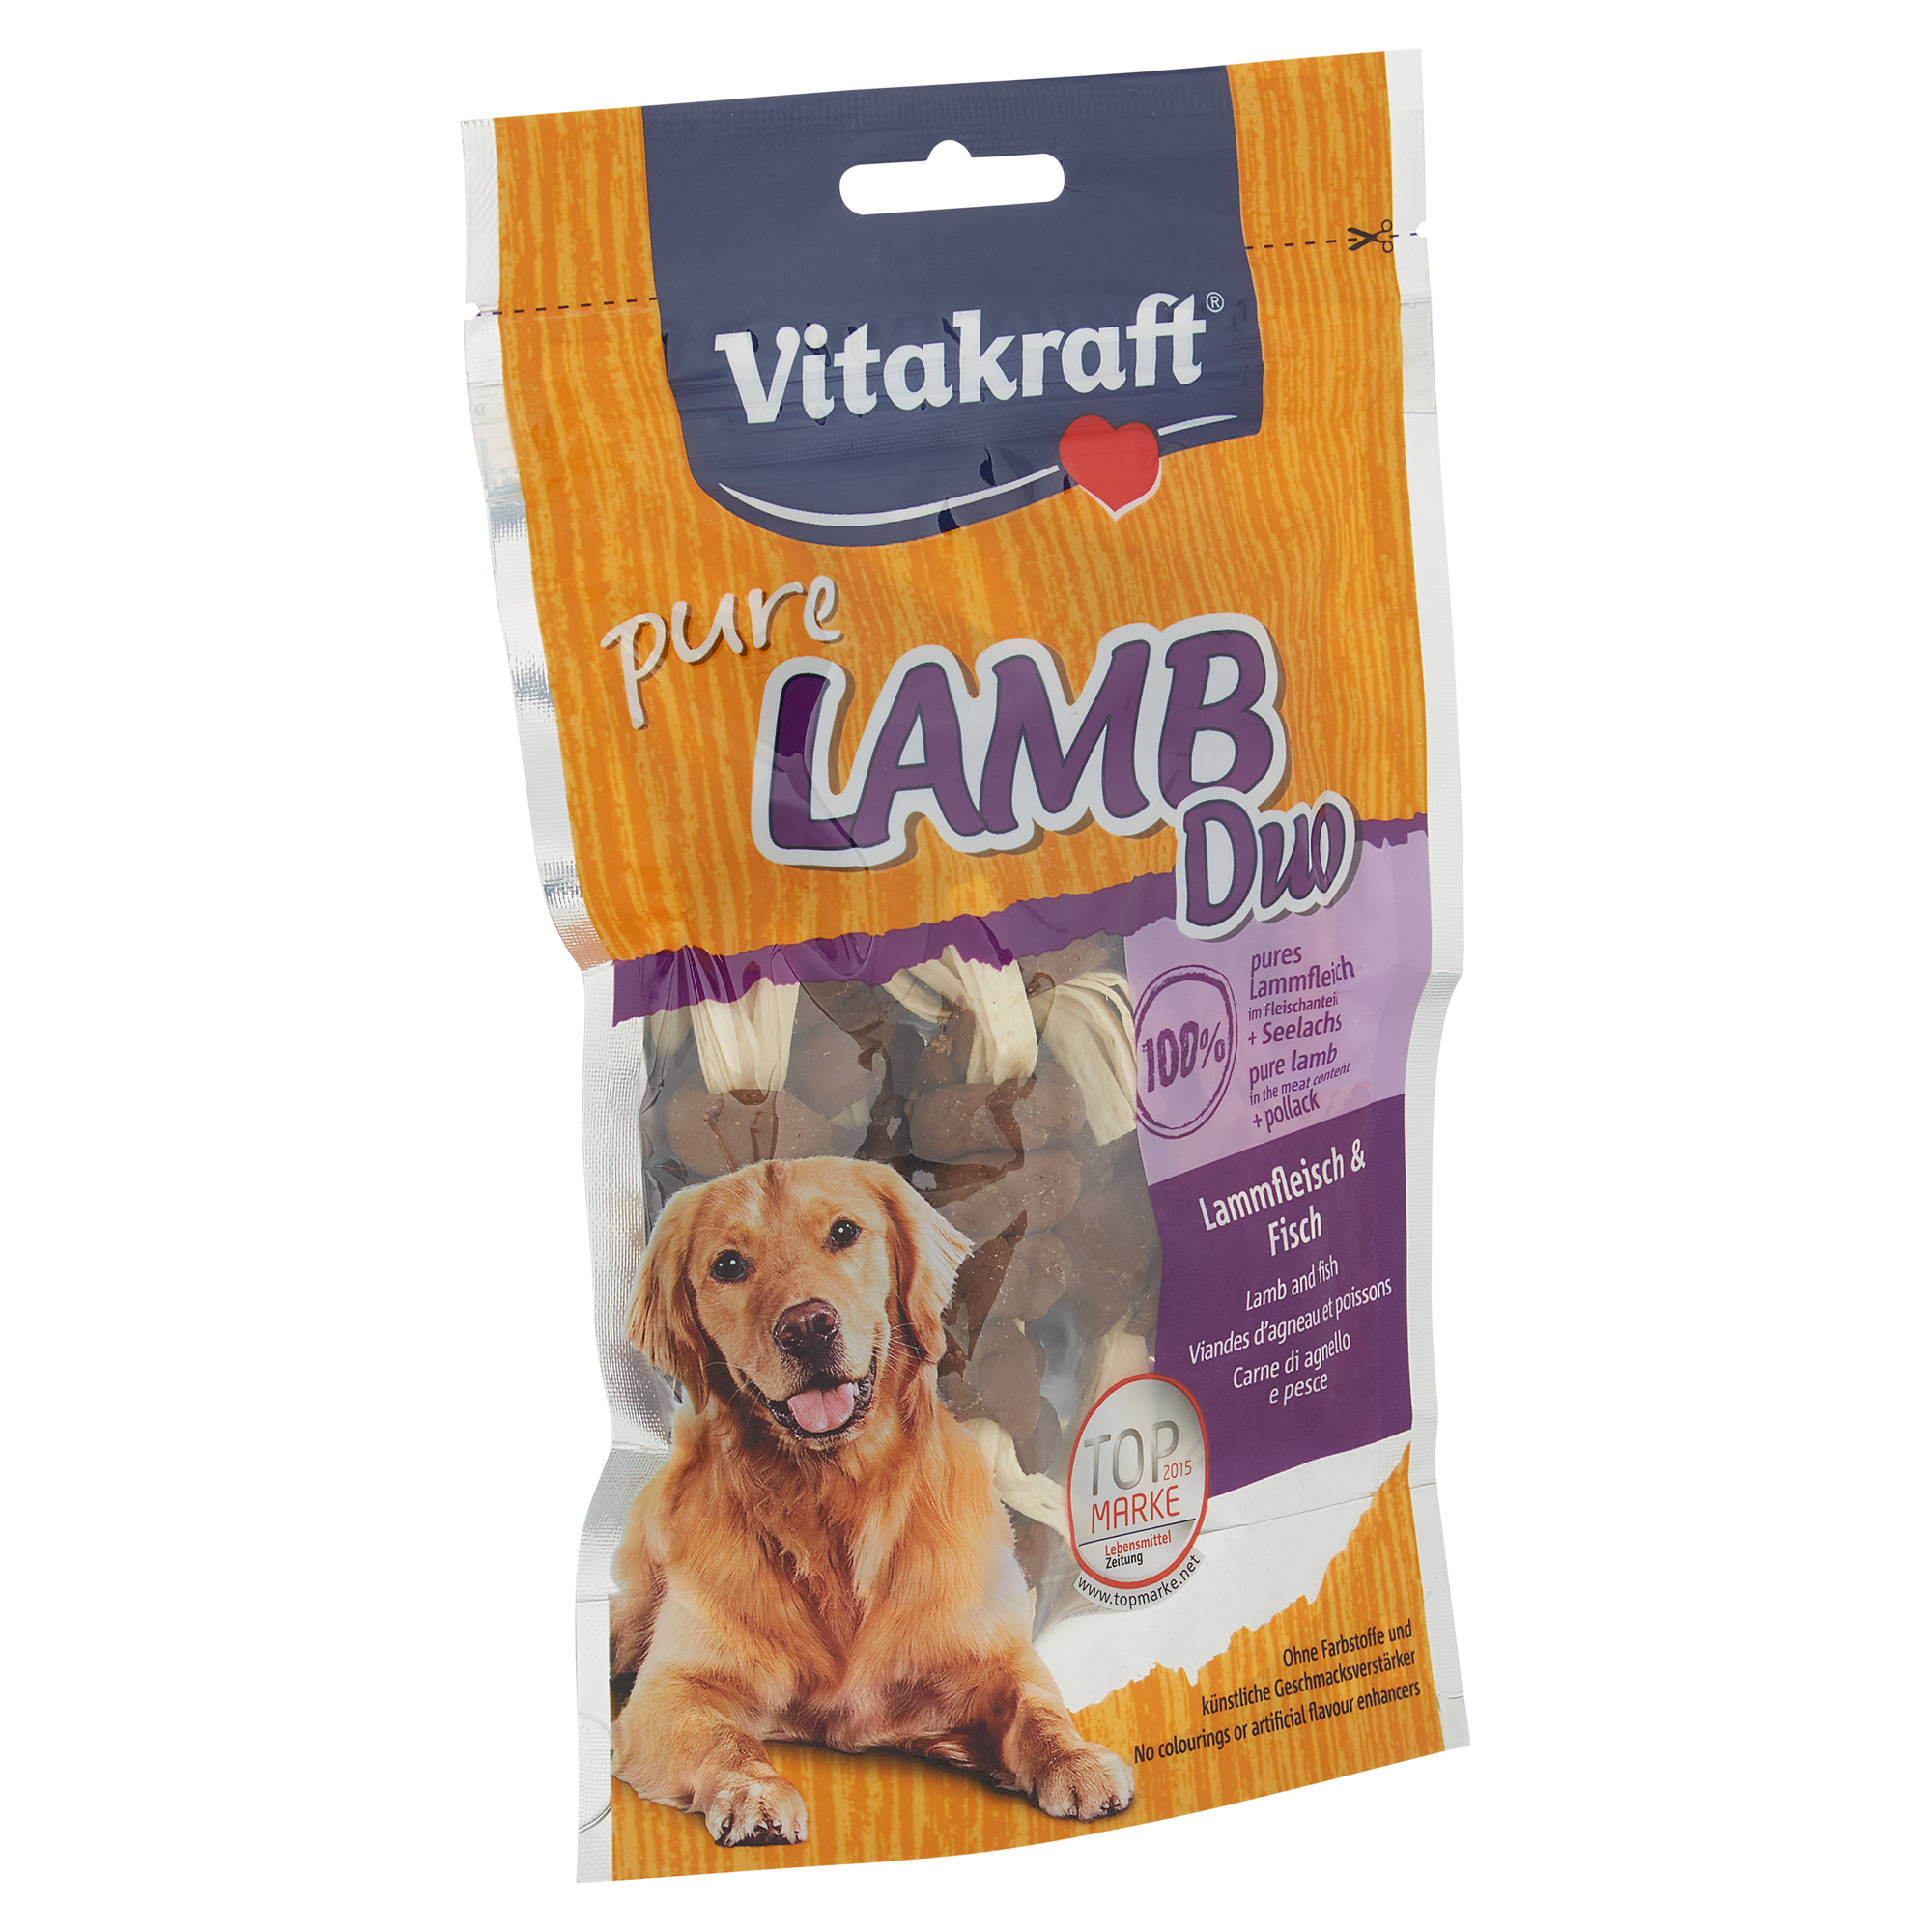 Hundesnack "Pure" Duo mit Lamm/Fisch 80 g + product picture